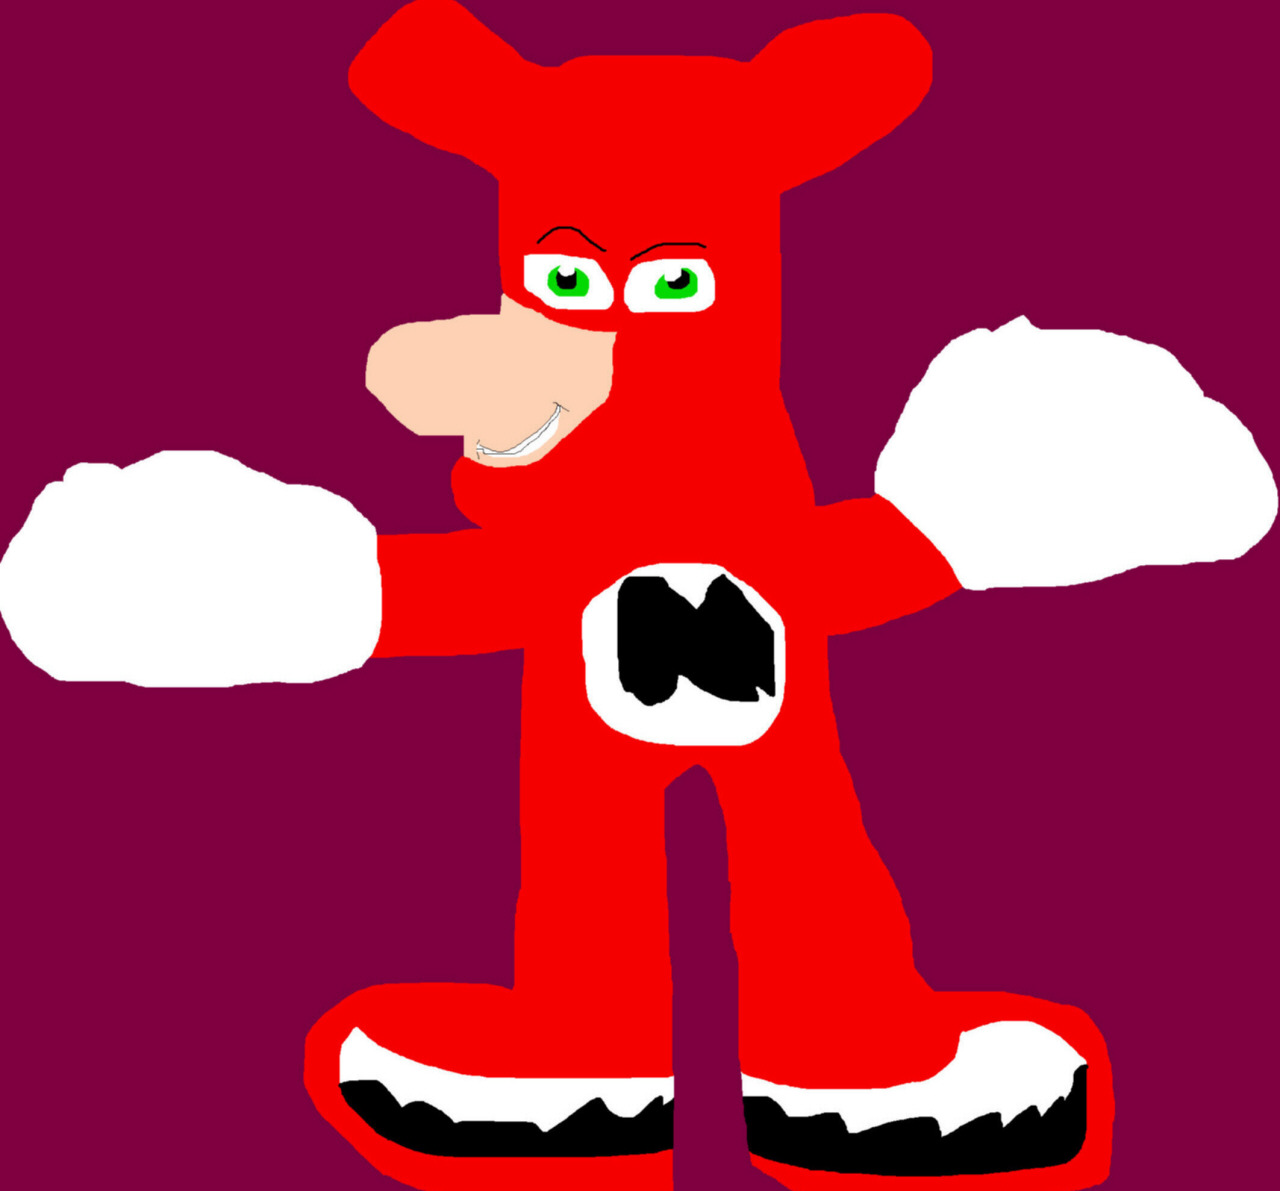 The Noid With Green Eyes MS Paint^0^ by Falconlobo